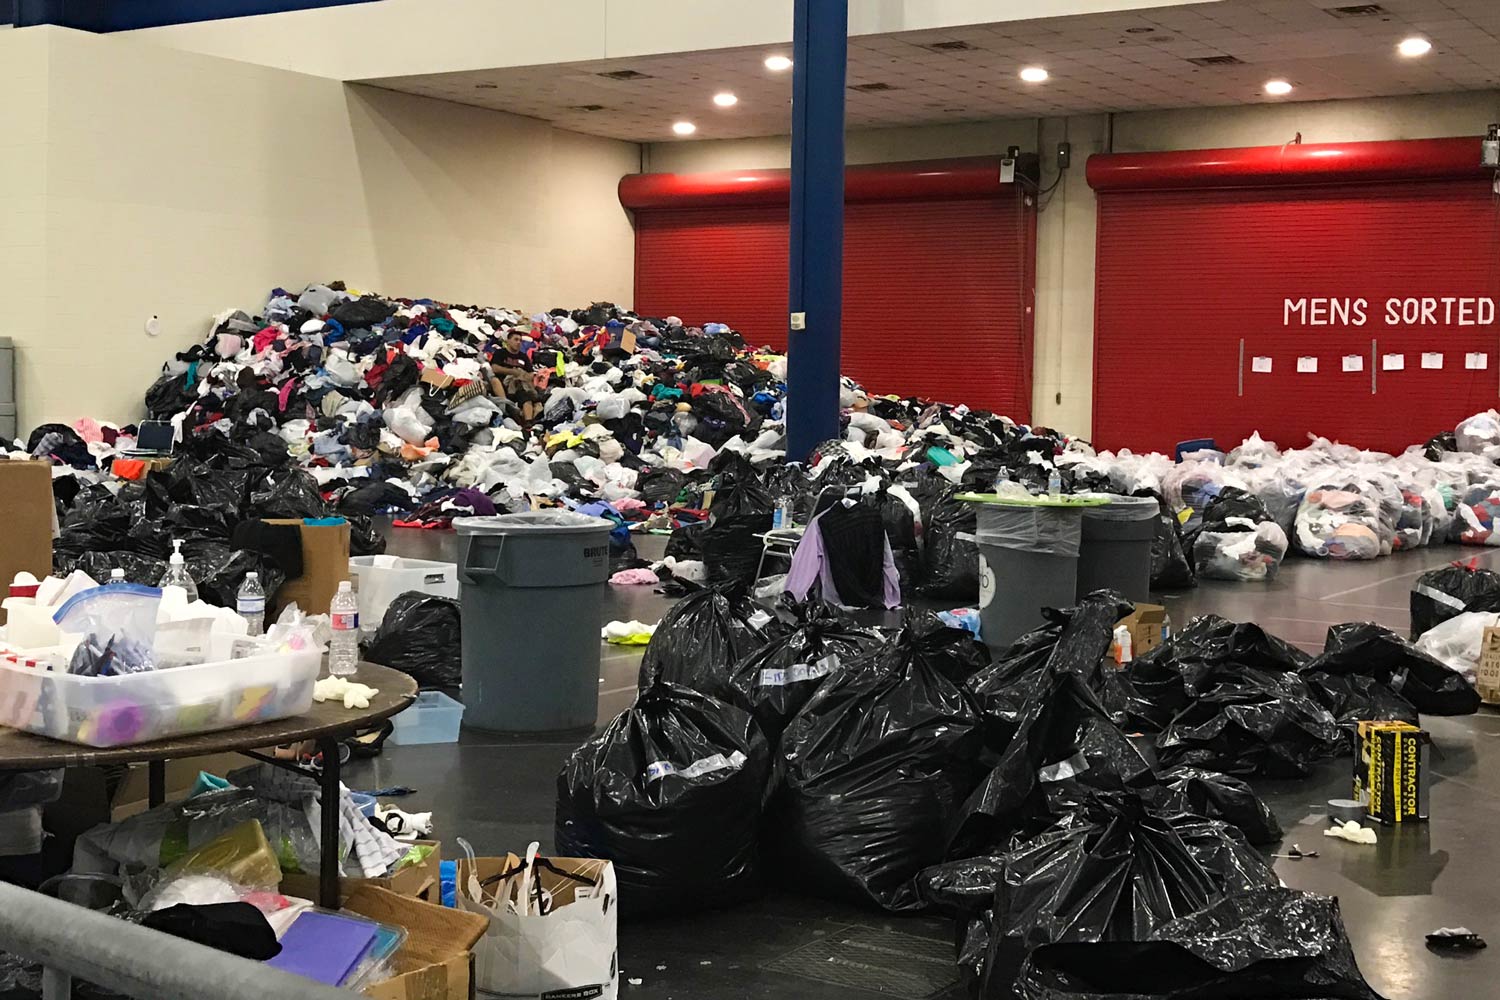 Mounds of donations of clothes at a Houston shelter.